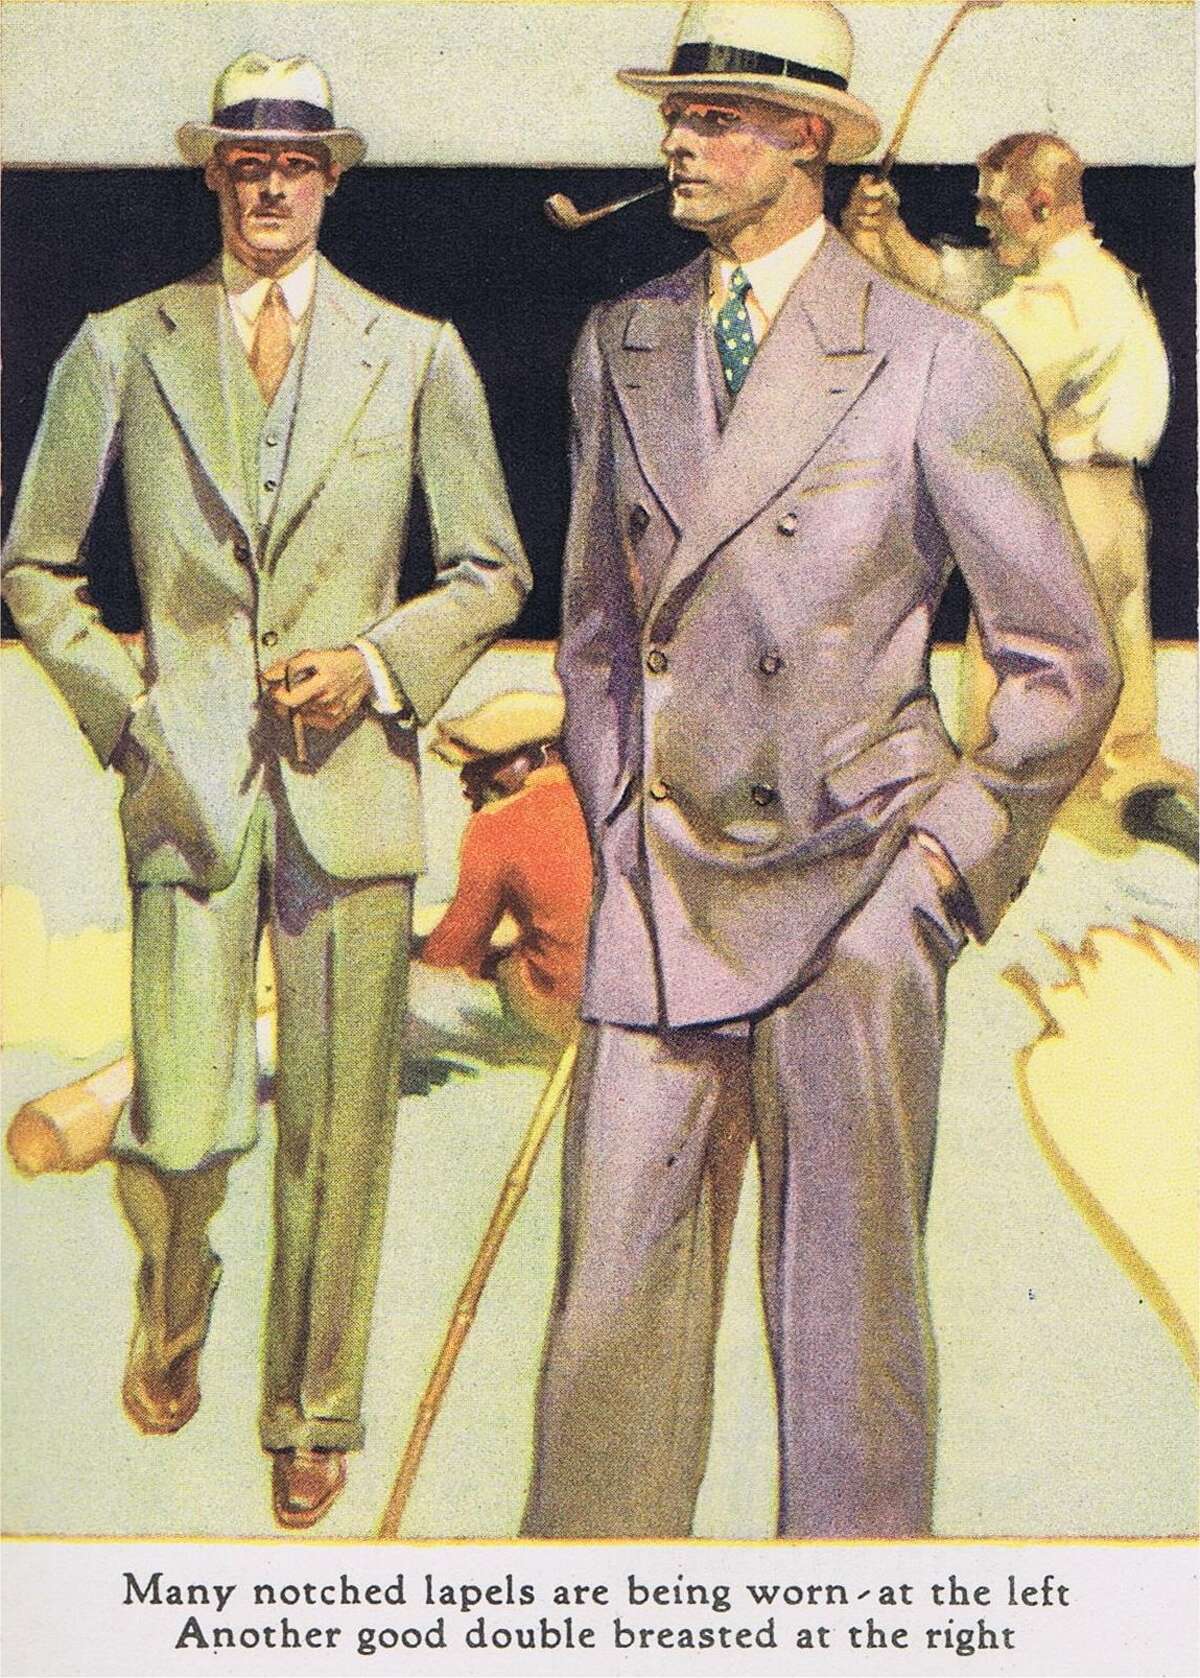 Men's fashion collection from 1926